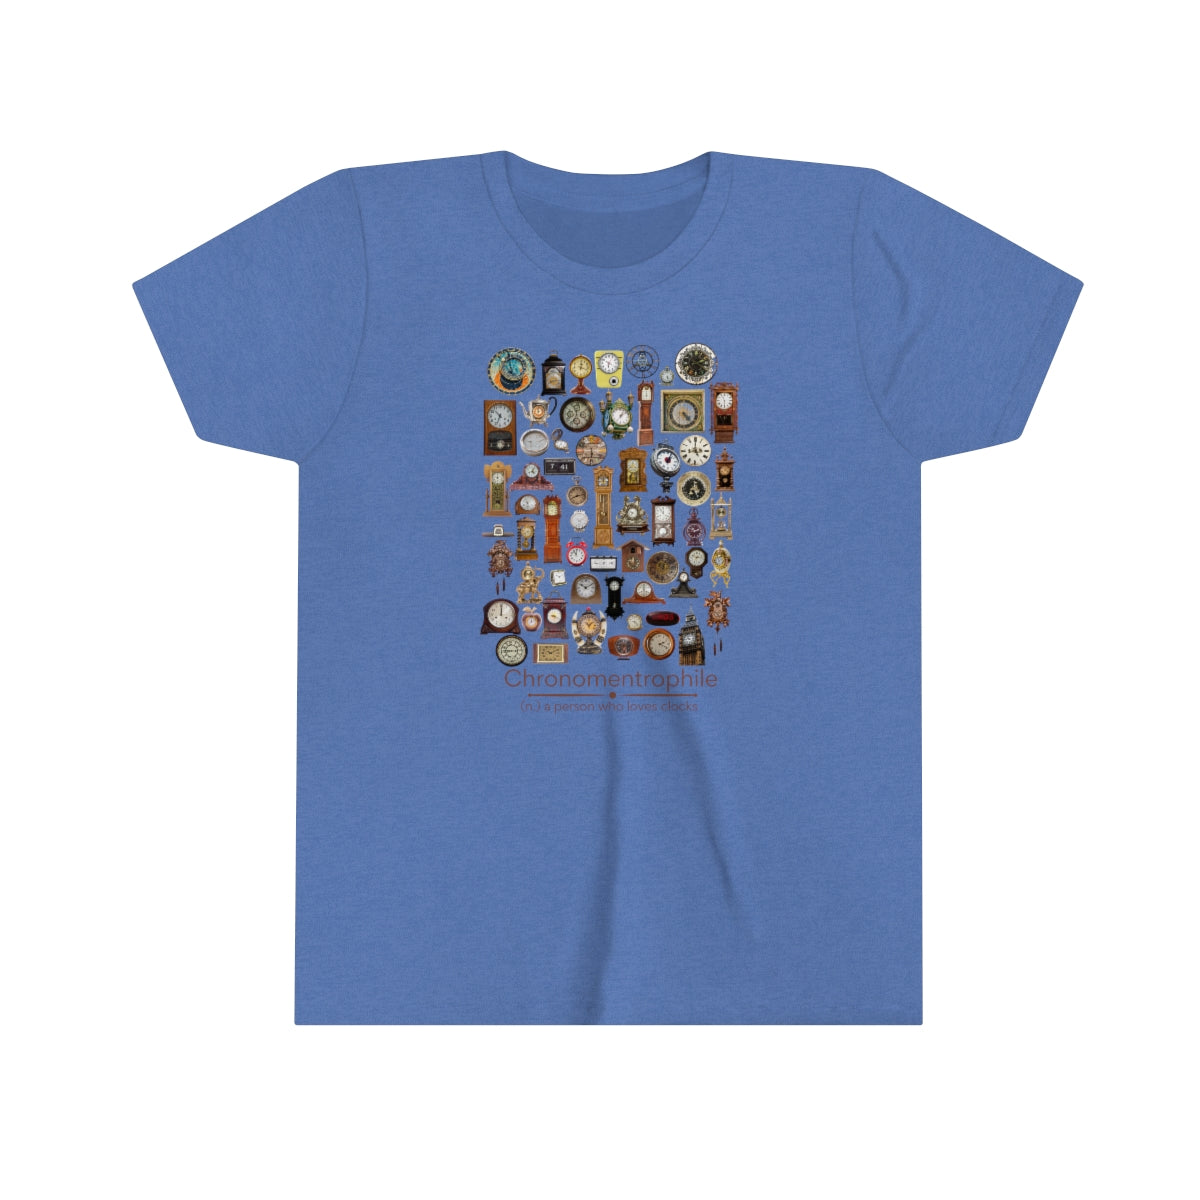 Chronomentrophile (realistic) - Clock Lover Youth Short Sleeve Tee